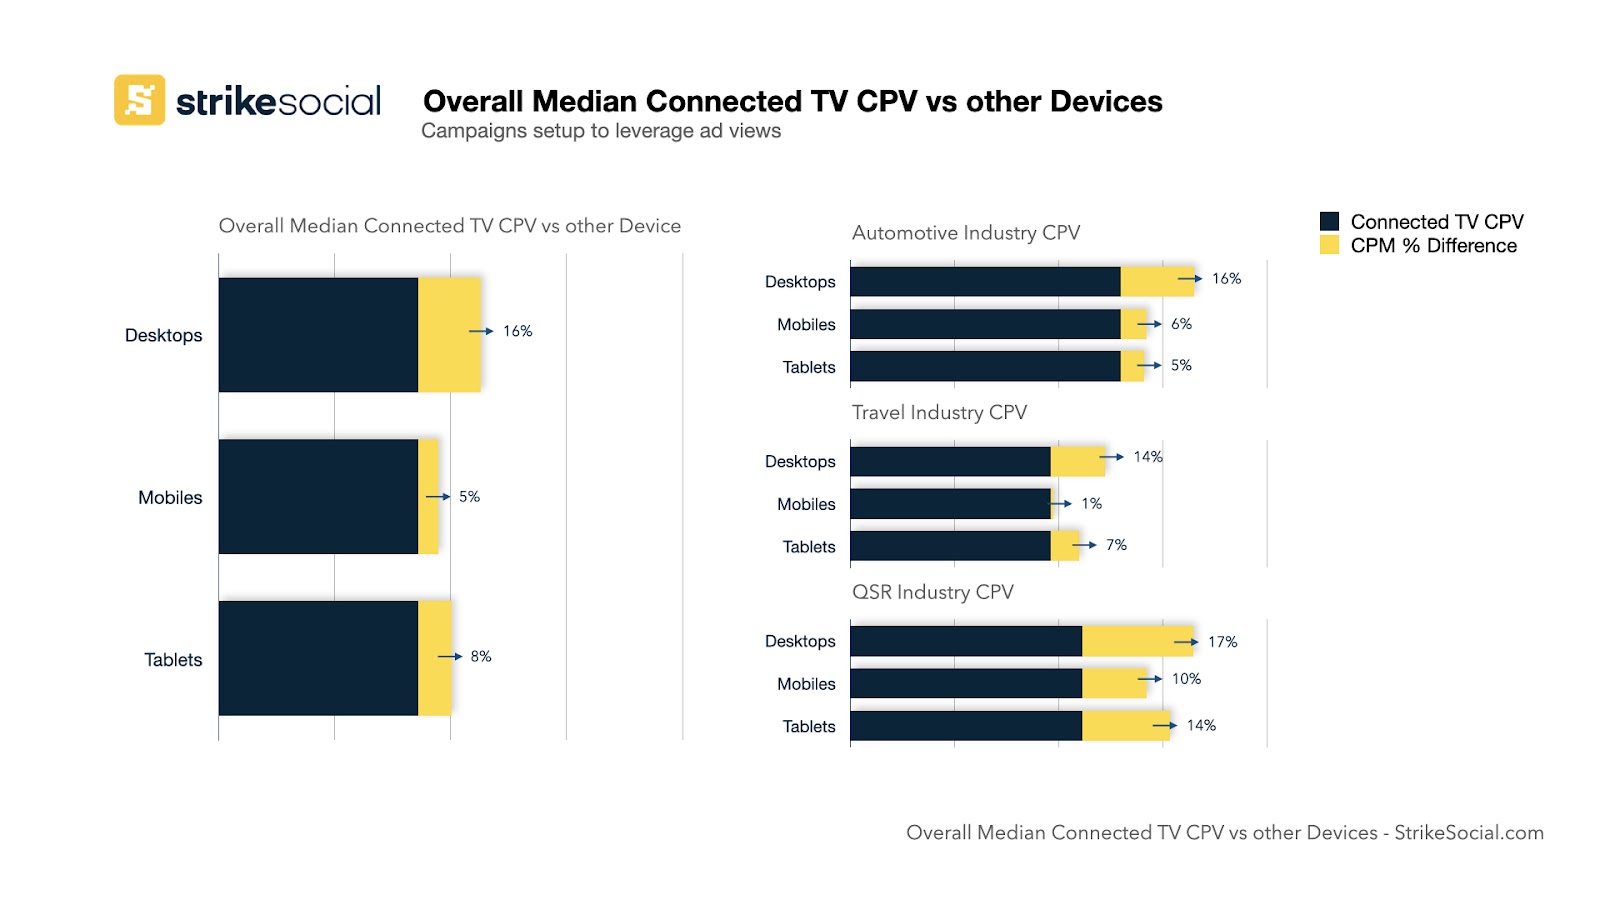 Overall Median Connected TV CPV vs other devices